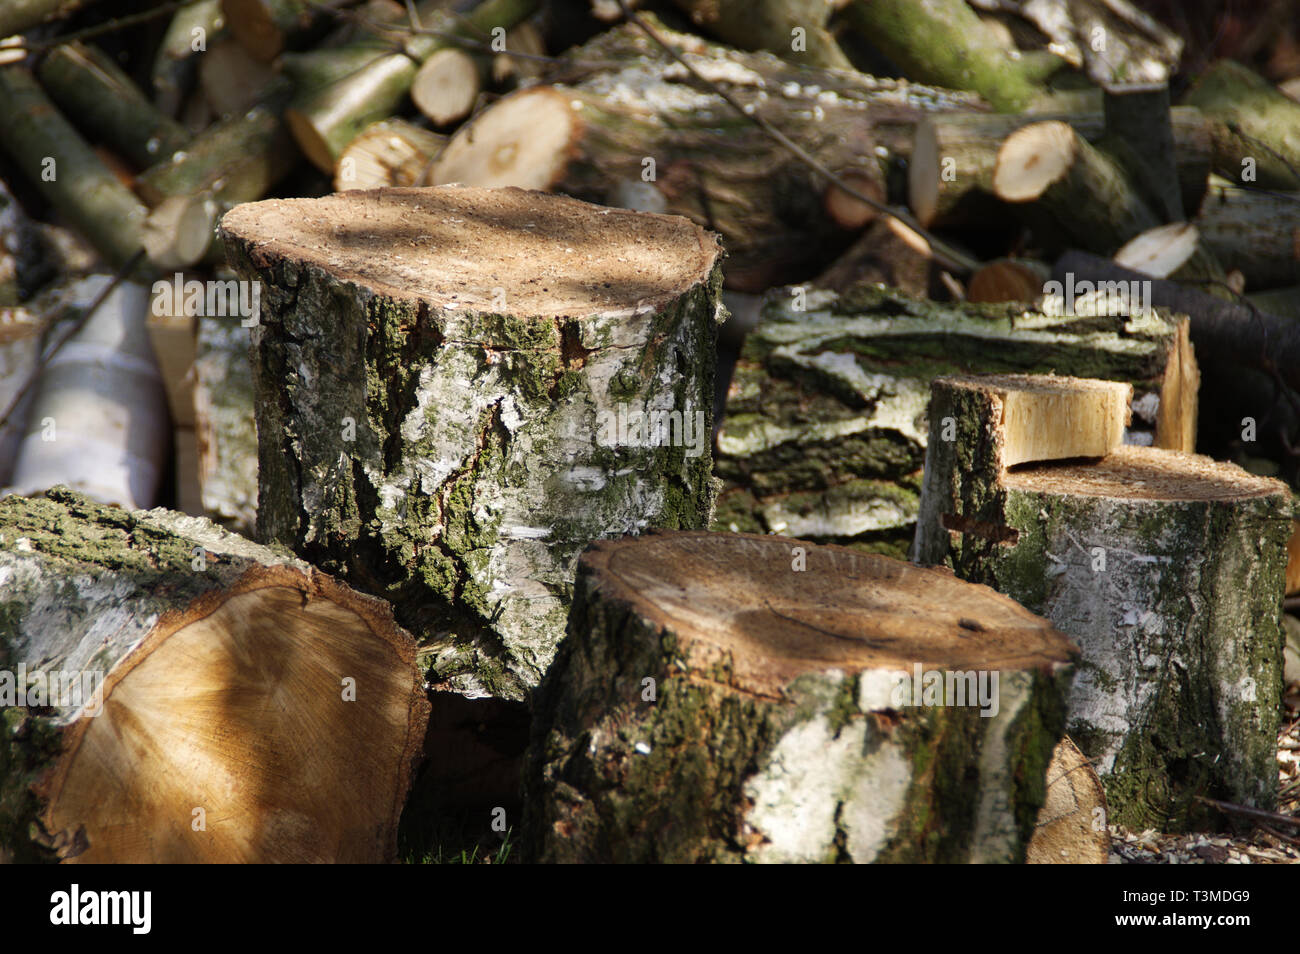 Felled tree trunks. Ecology, natural environment and logging concept. Stock Photo